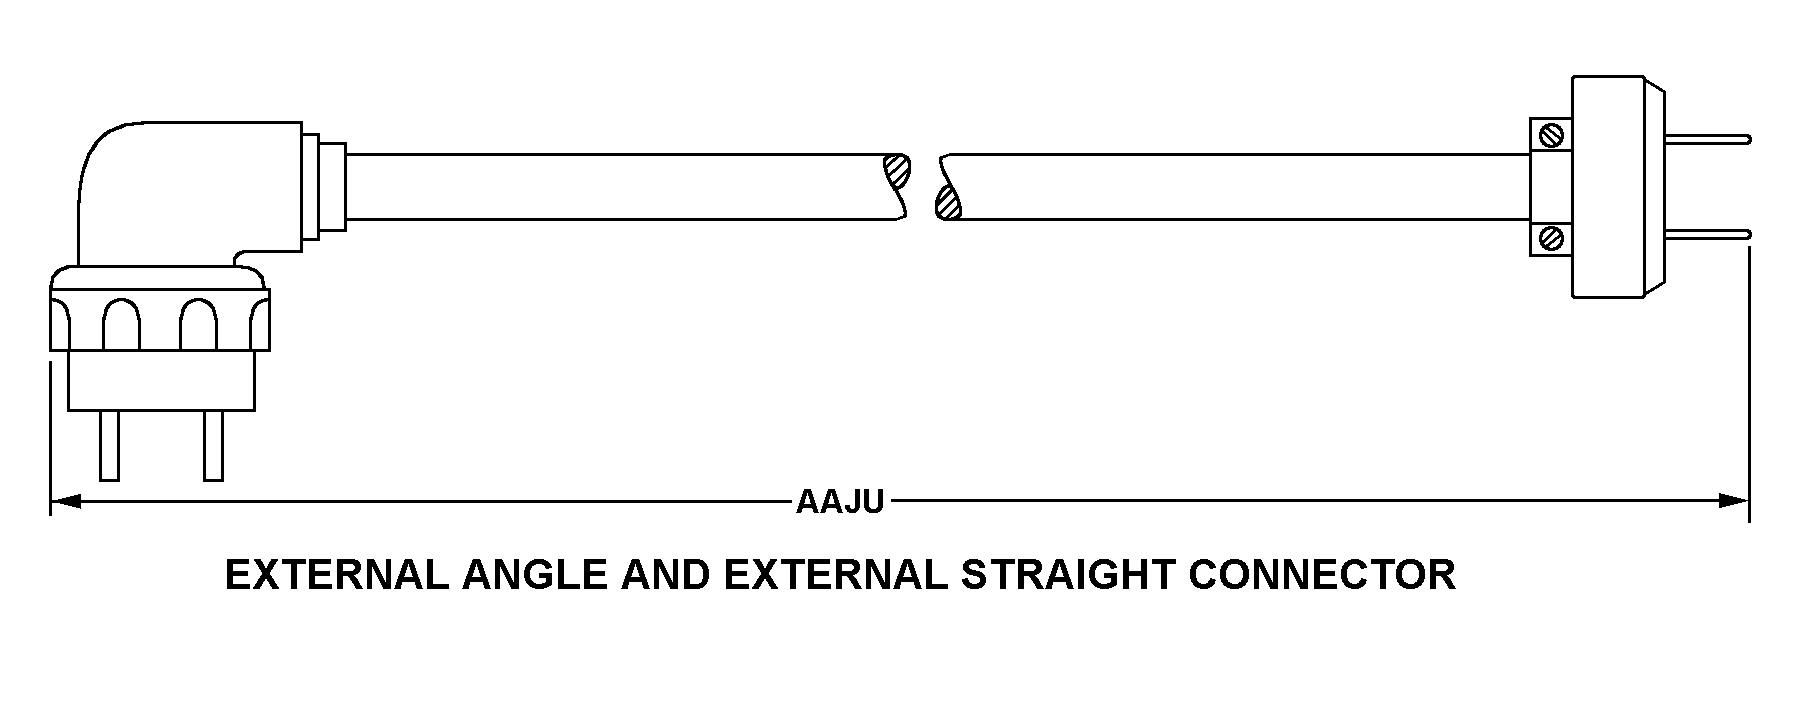 EXTERNAL ANGLE AND EXTERNAL STRAIGHT CONNECTOR style nsn 5995-01-418-4942